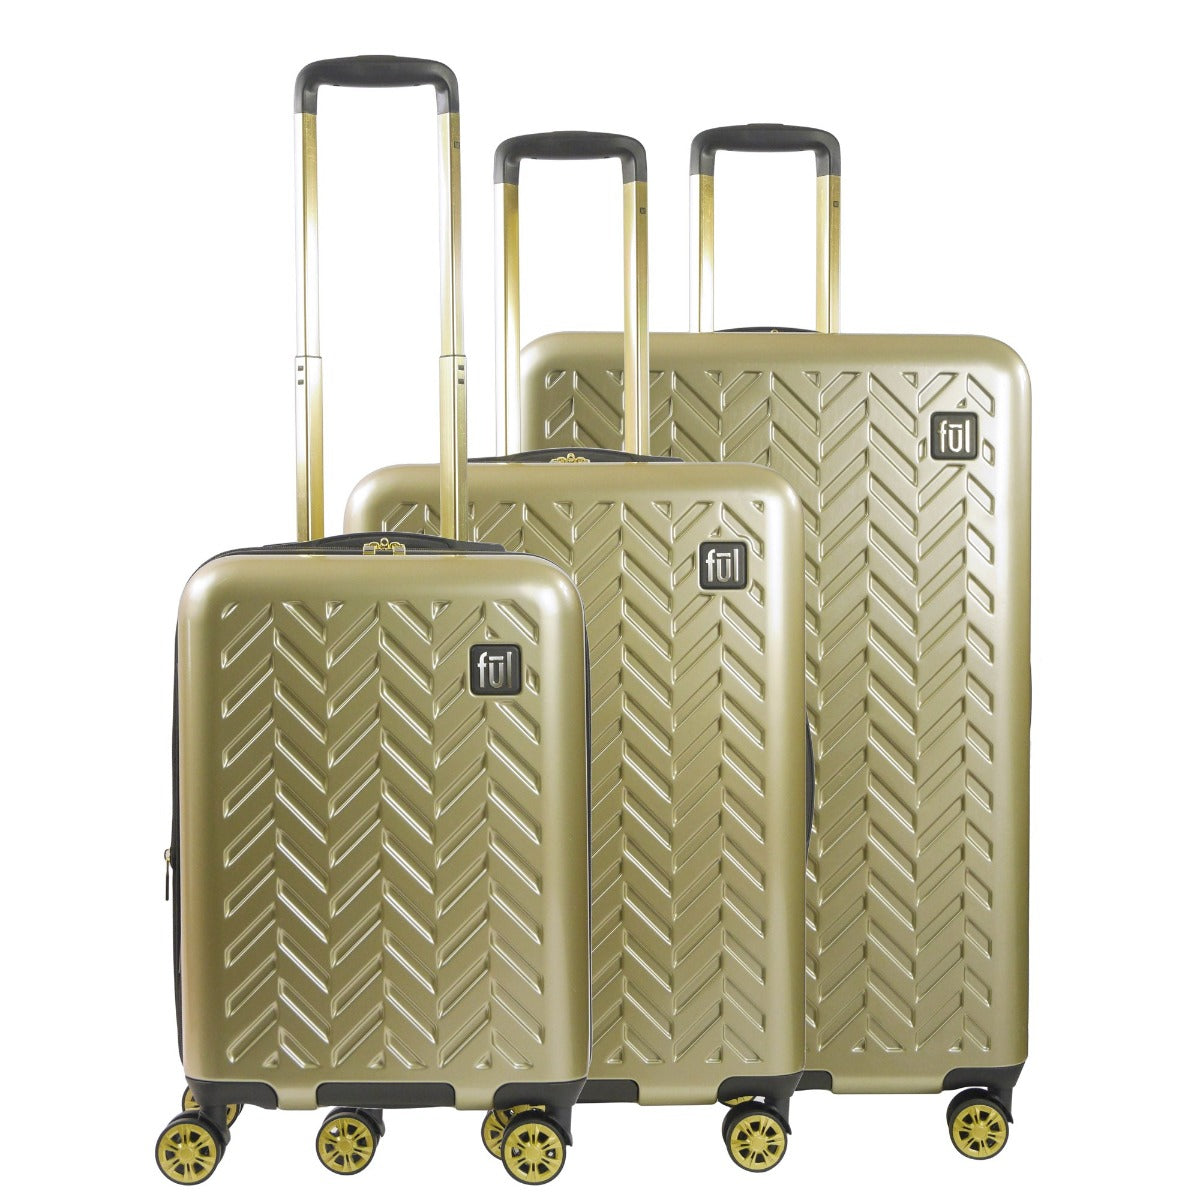 Ful Groove hardside spinner 3 piece gold luggage set 22" 27" 31"